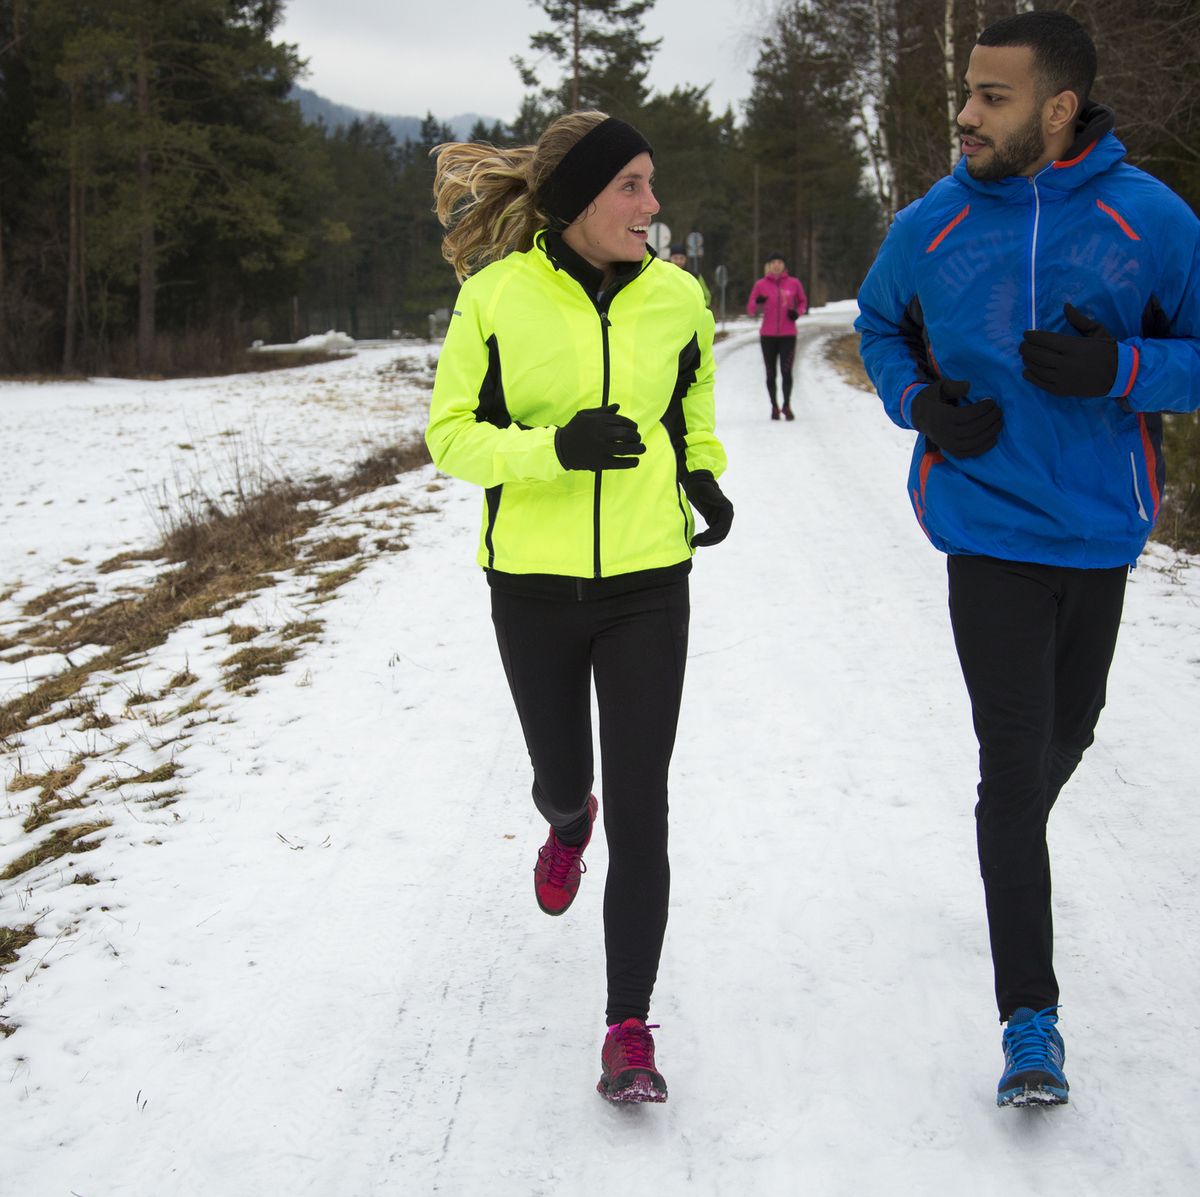 Winter Running Tips for a Safe Workout